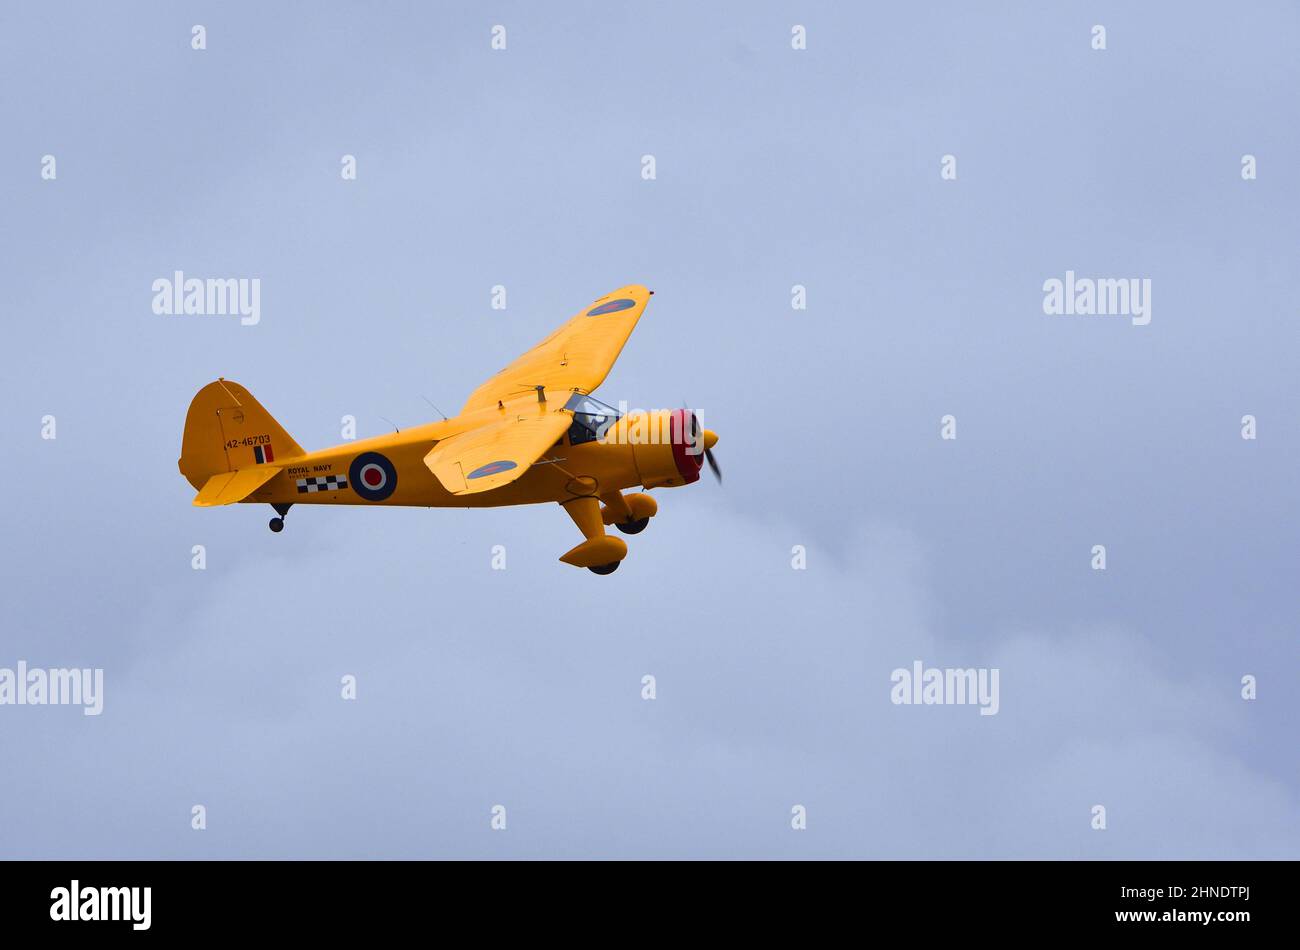 Stinson Reliant  aircraft  1942 in  royal navy yellow colours flying . Stock Photo